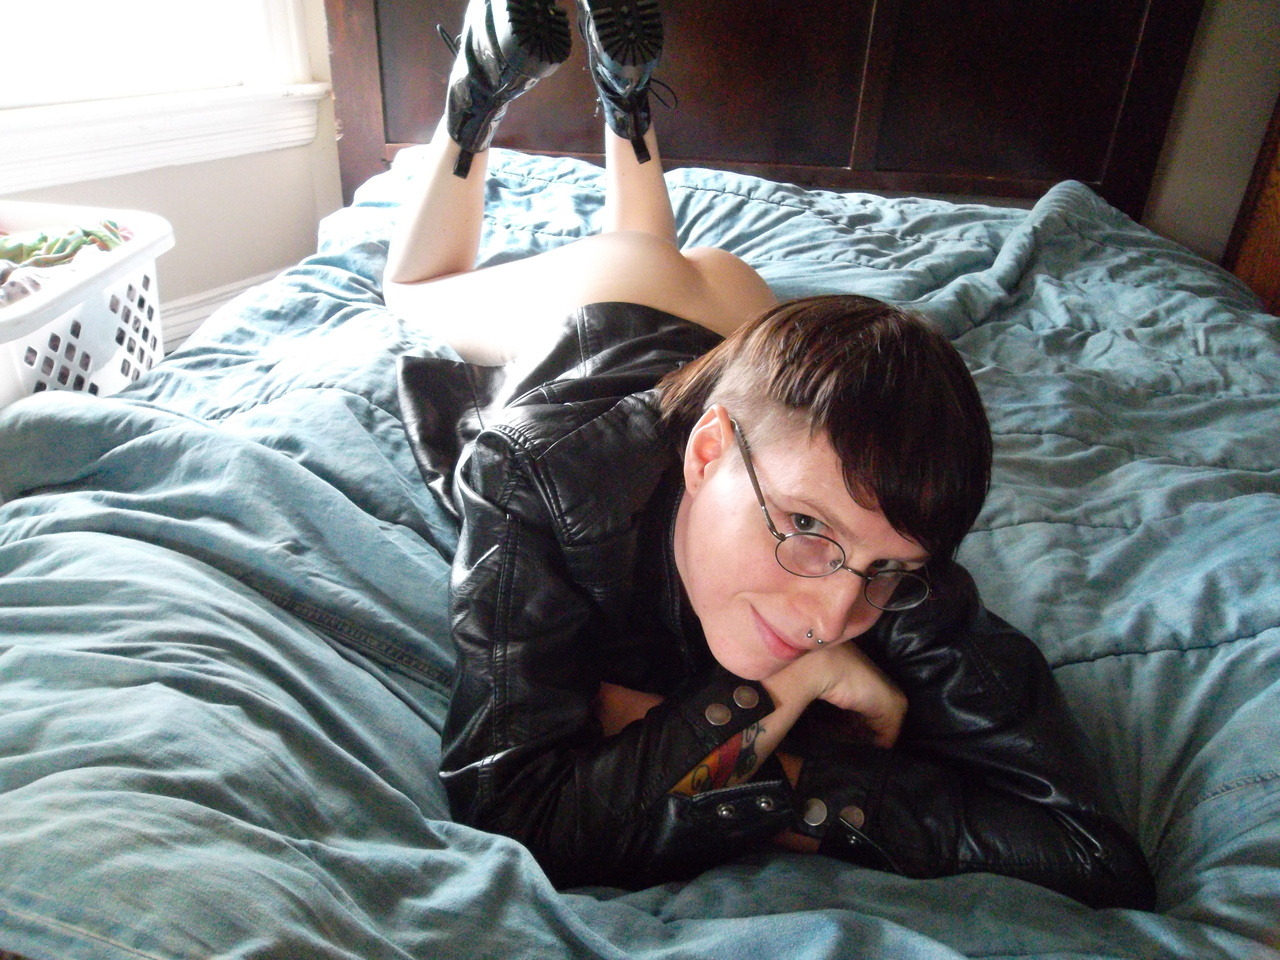 Found myself some patent leather combat boots. To reiterate: patent leather combat